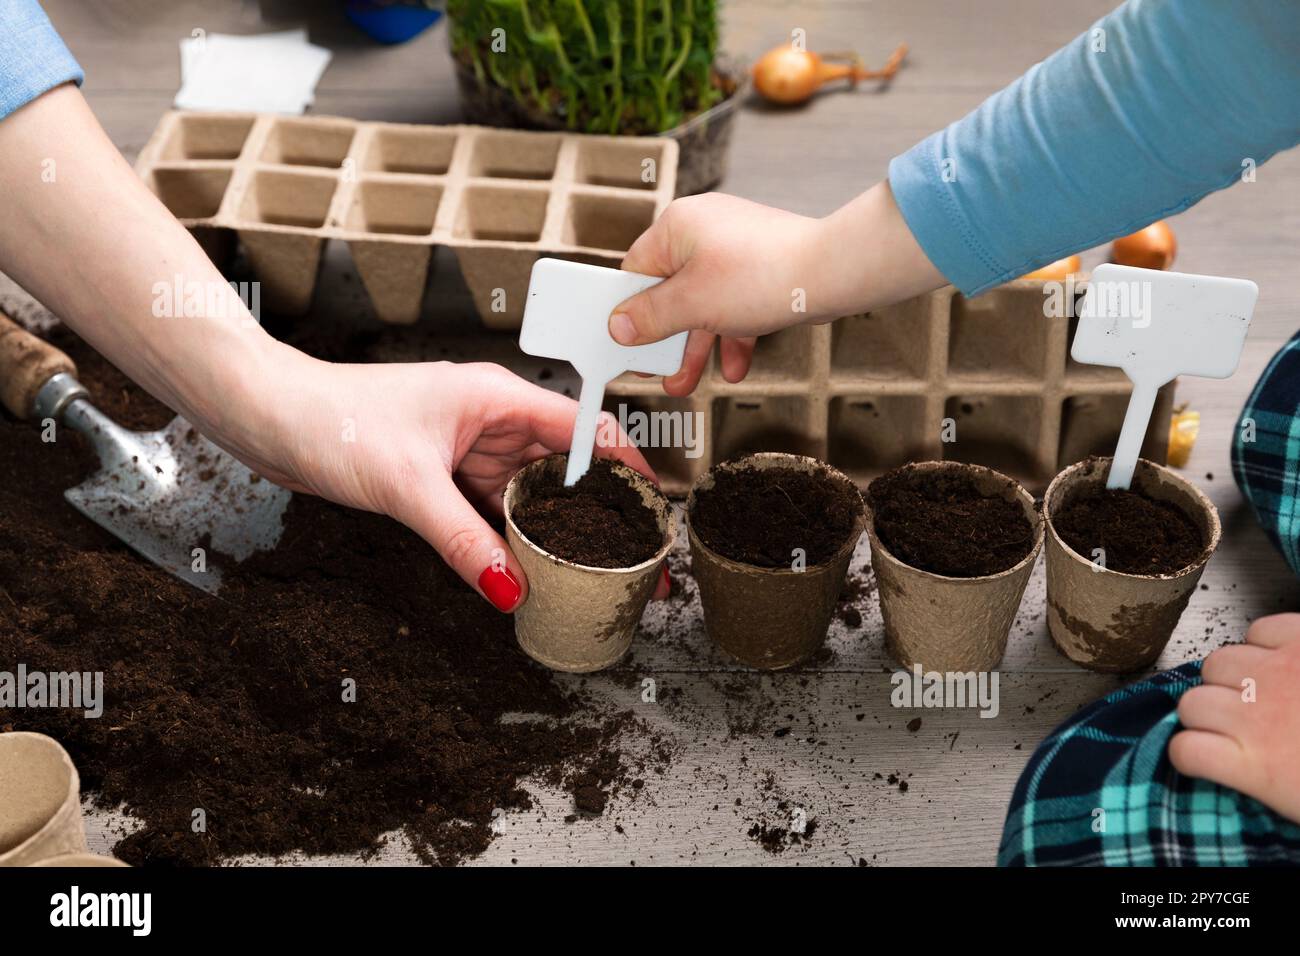 Mother and child planting seeds at home in fertile black earth. Putting name tags for plants. In background freshly grown sprouts. Spring and gardening concept. Stock Photo